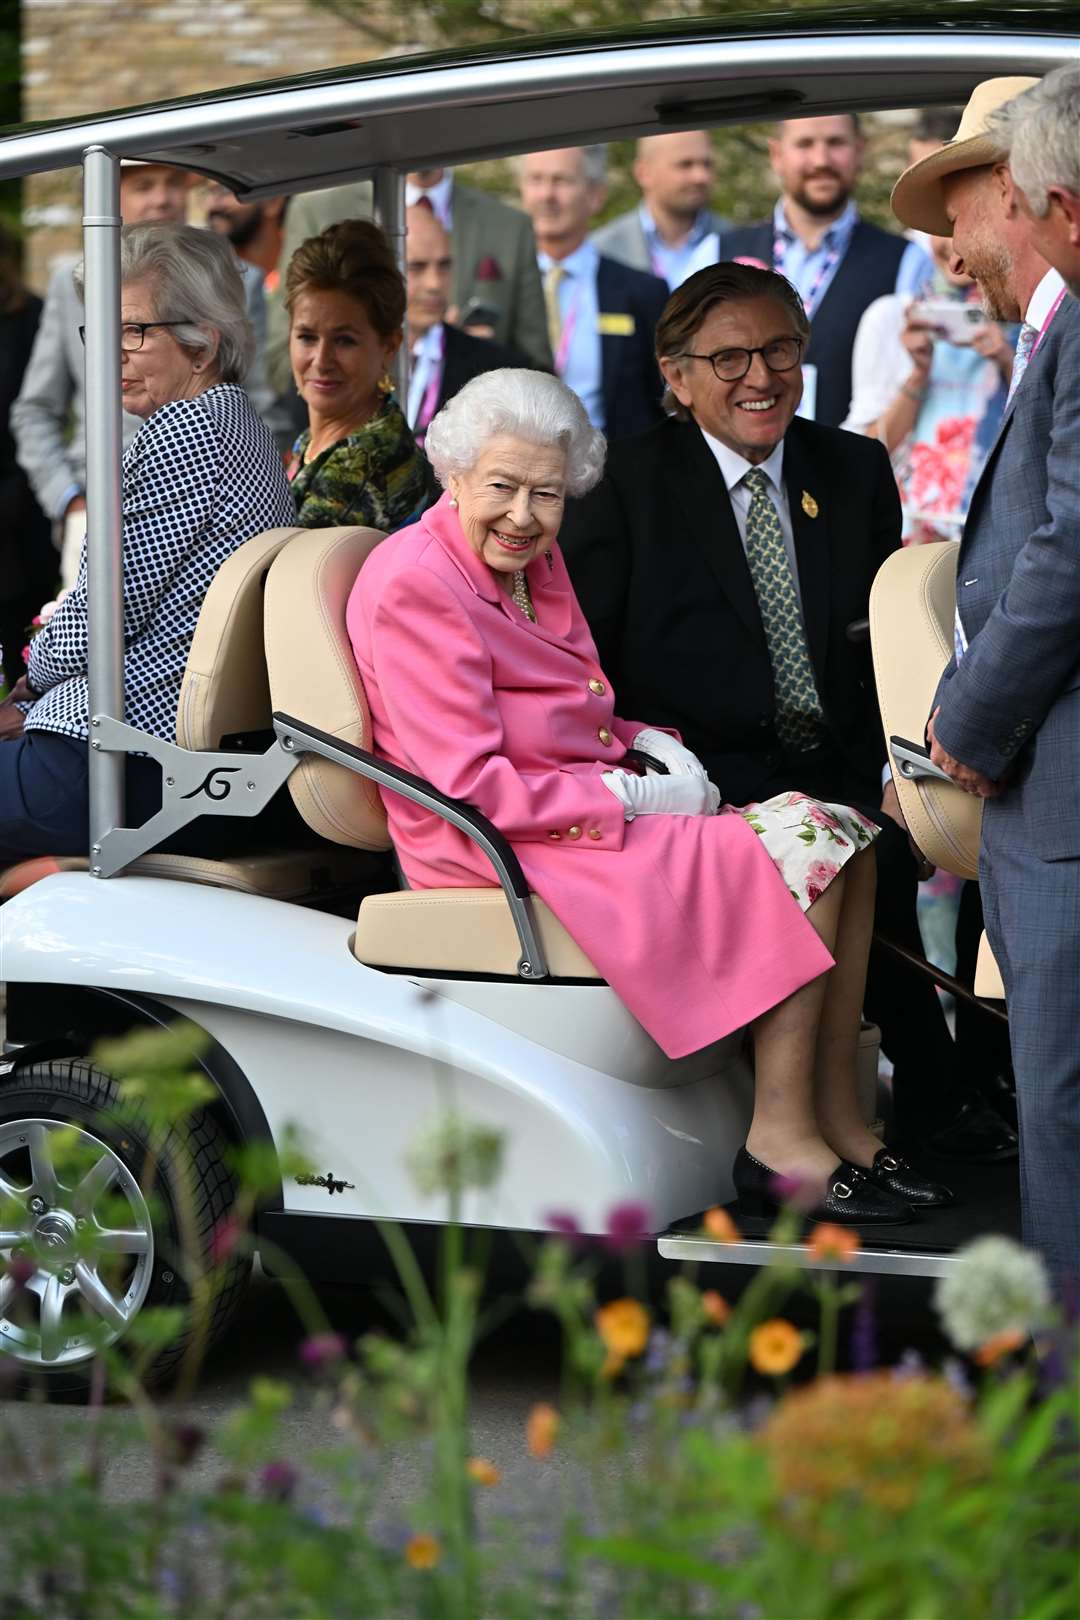 The Queen used a a buggy to travel around the Chelsea Flower Show in May (Paul Grover/Daily Telegraph/PA)